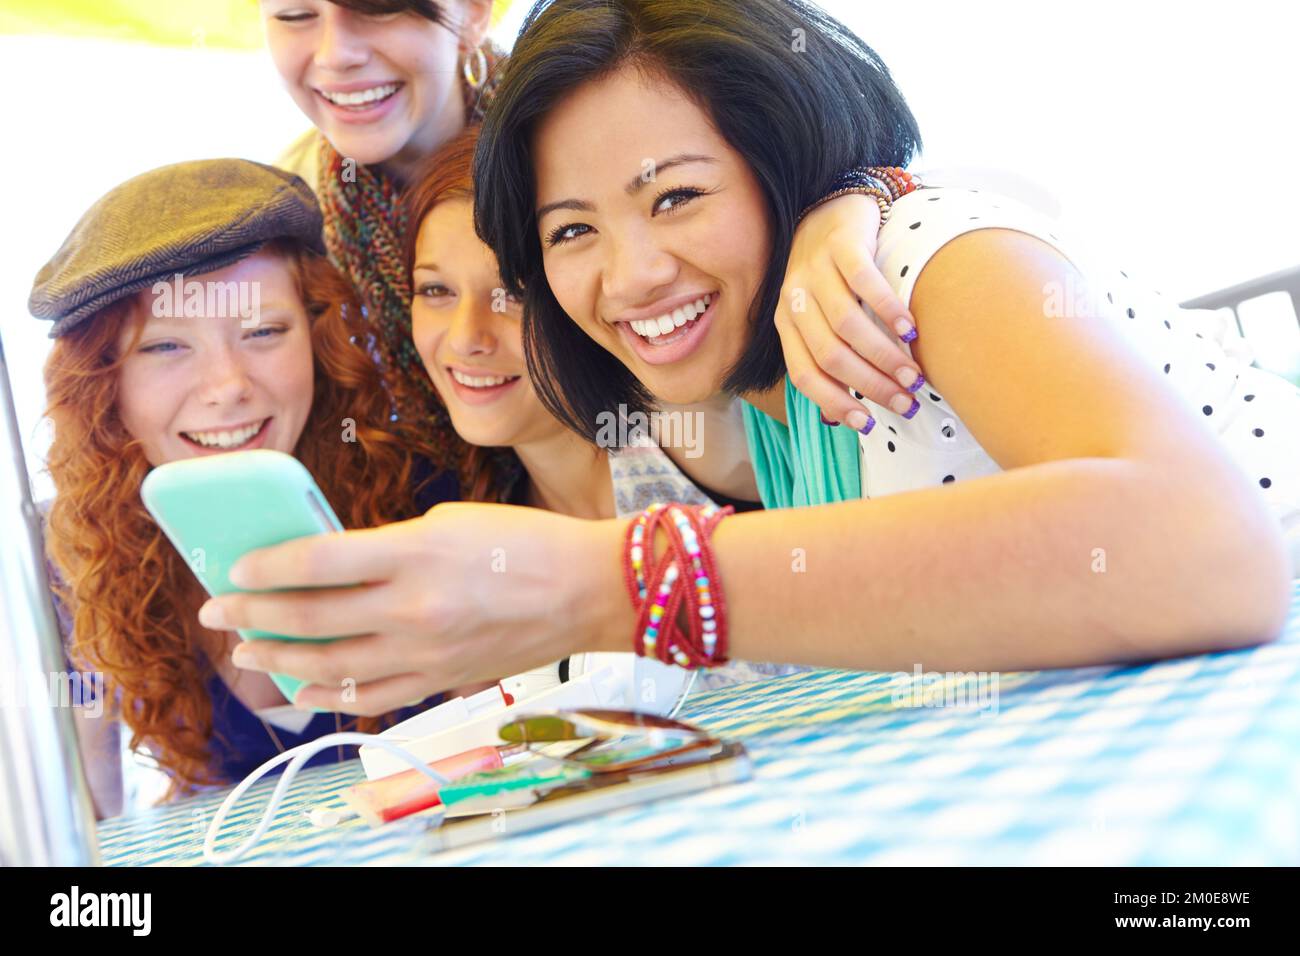 Sharing the latest news. A group of adolescent girls laughing as they look at something on a smartphone screen. Stock Photo